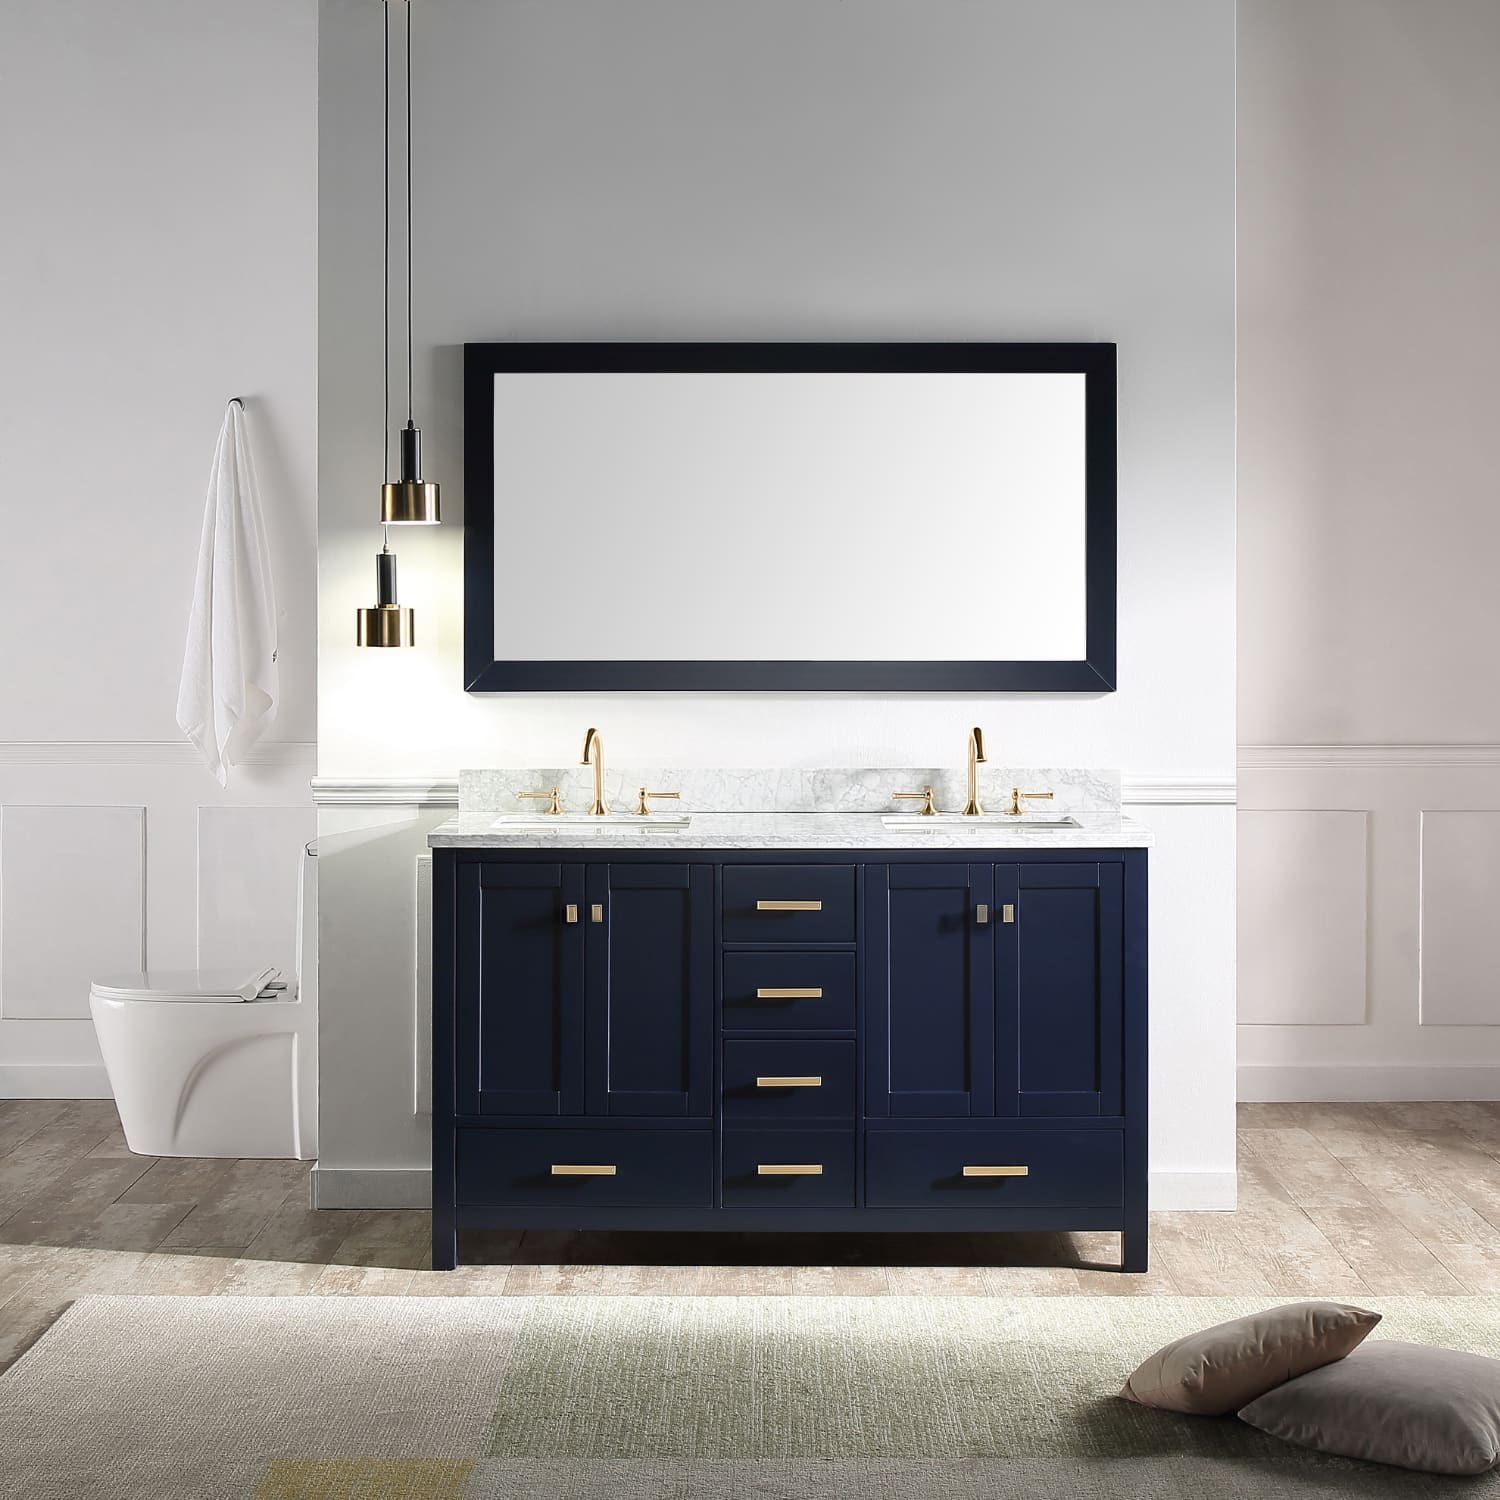 CASAINC 60 x 20 x 35.4 in. Two Sink Bathroom Vanity in Navy Blue with Mirror, With Carrara White Marble Countertop